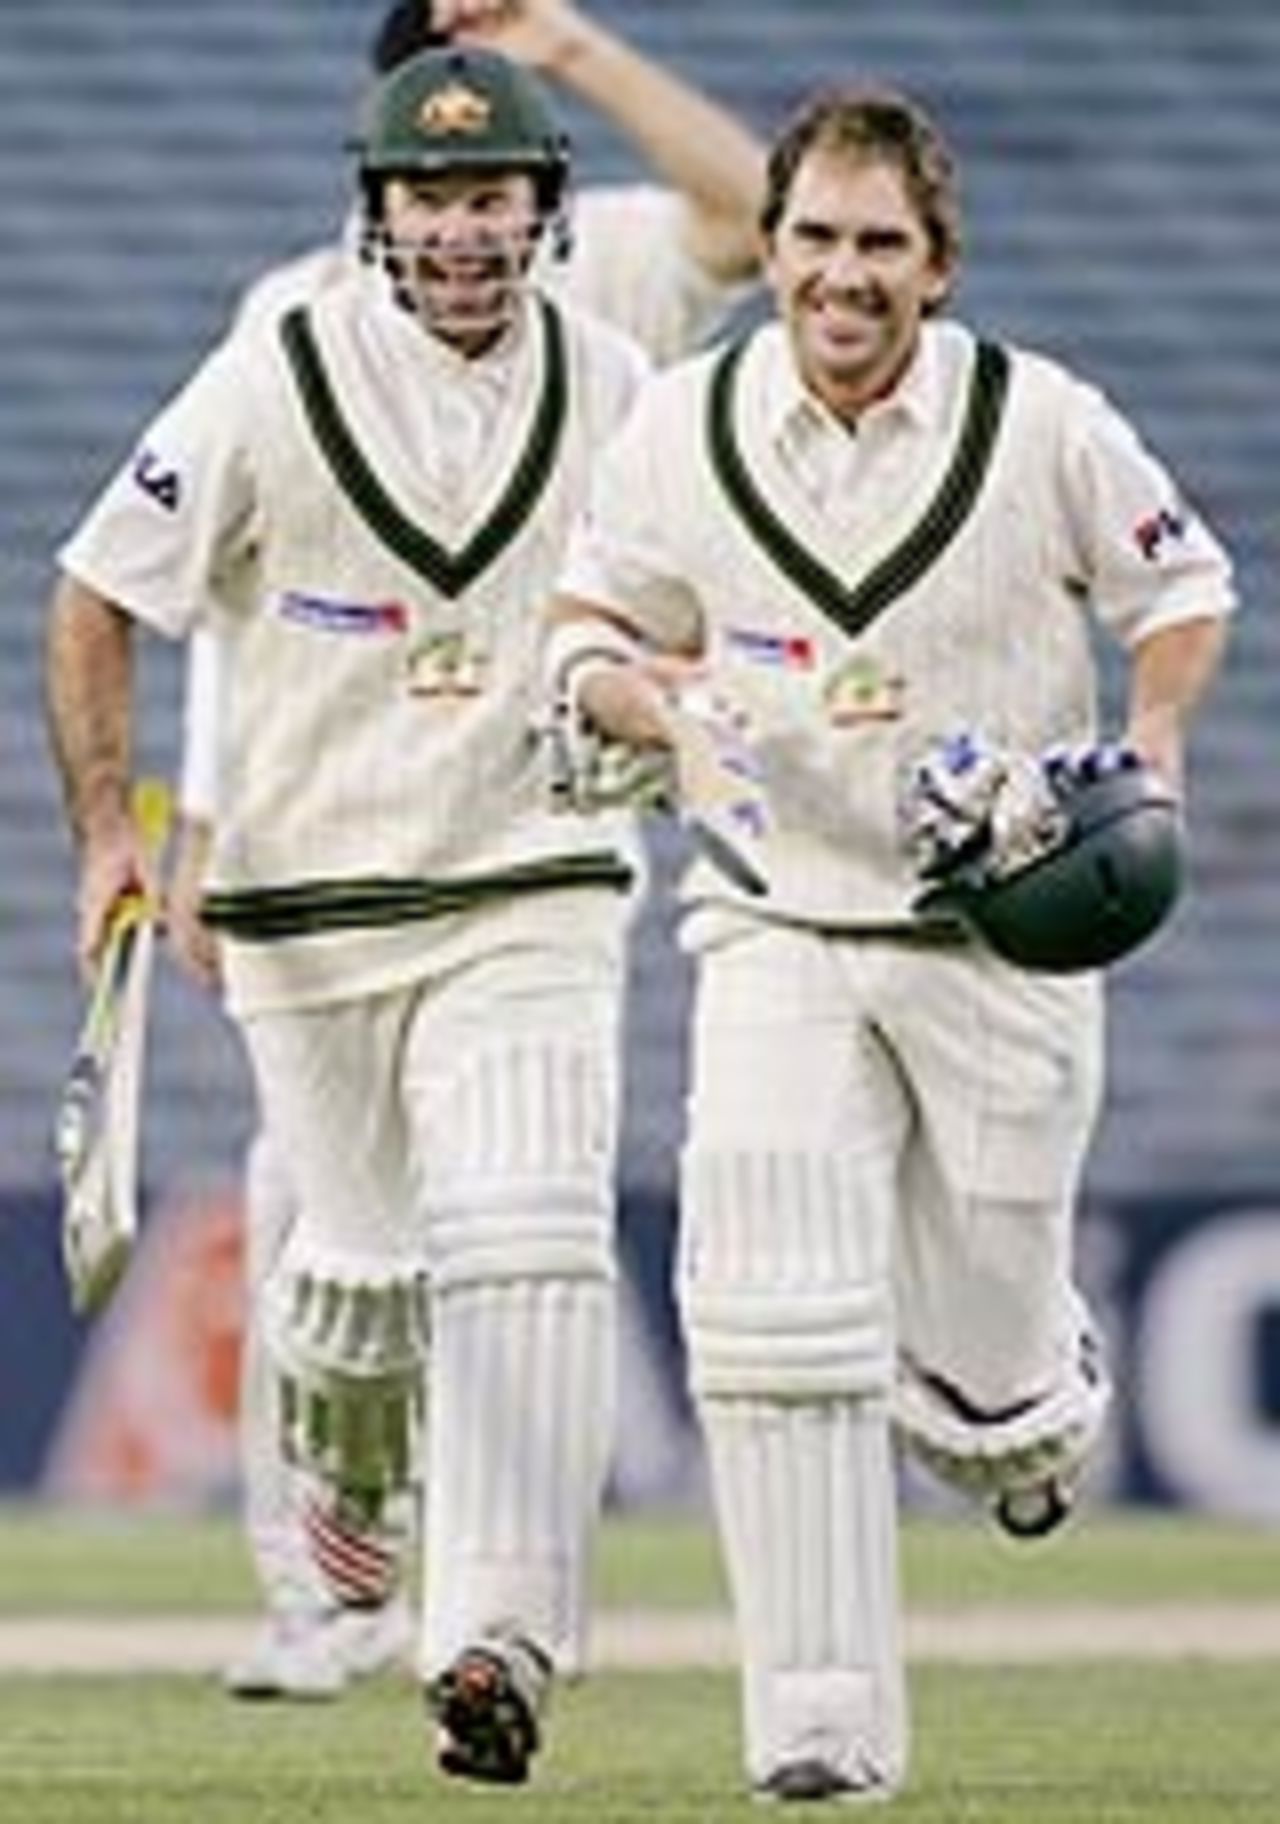 Ricky Ponting and Justin Langer celebrate after hitting the winning runs, New Zealand v Australia, 3rd Test, Auckland, 4th day, March 29, 2005